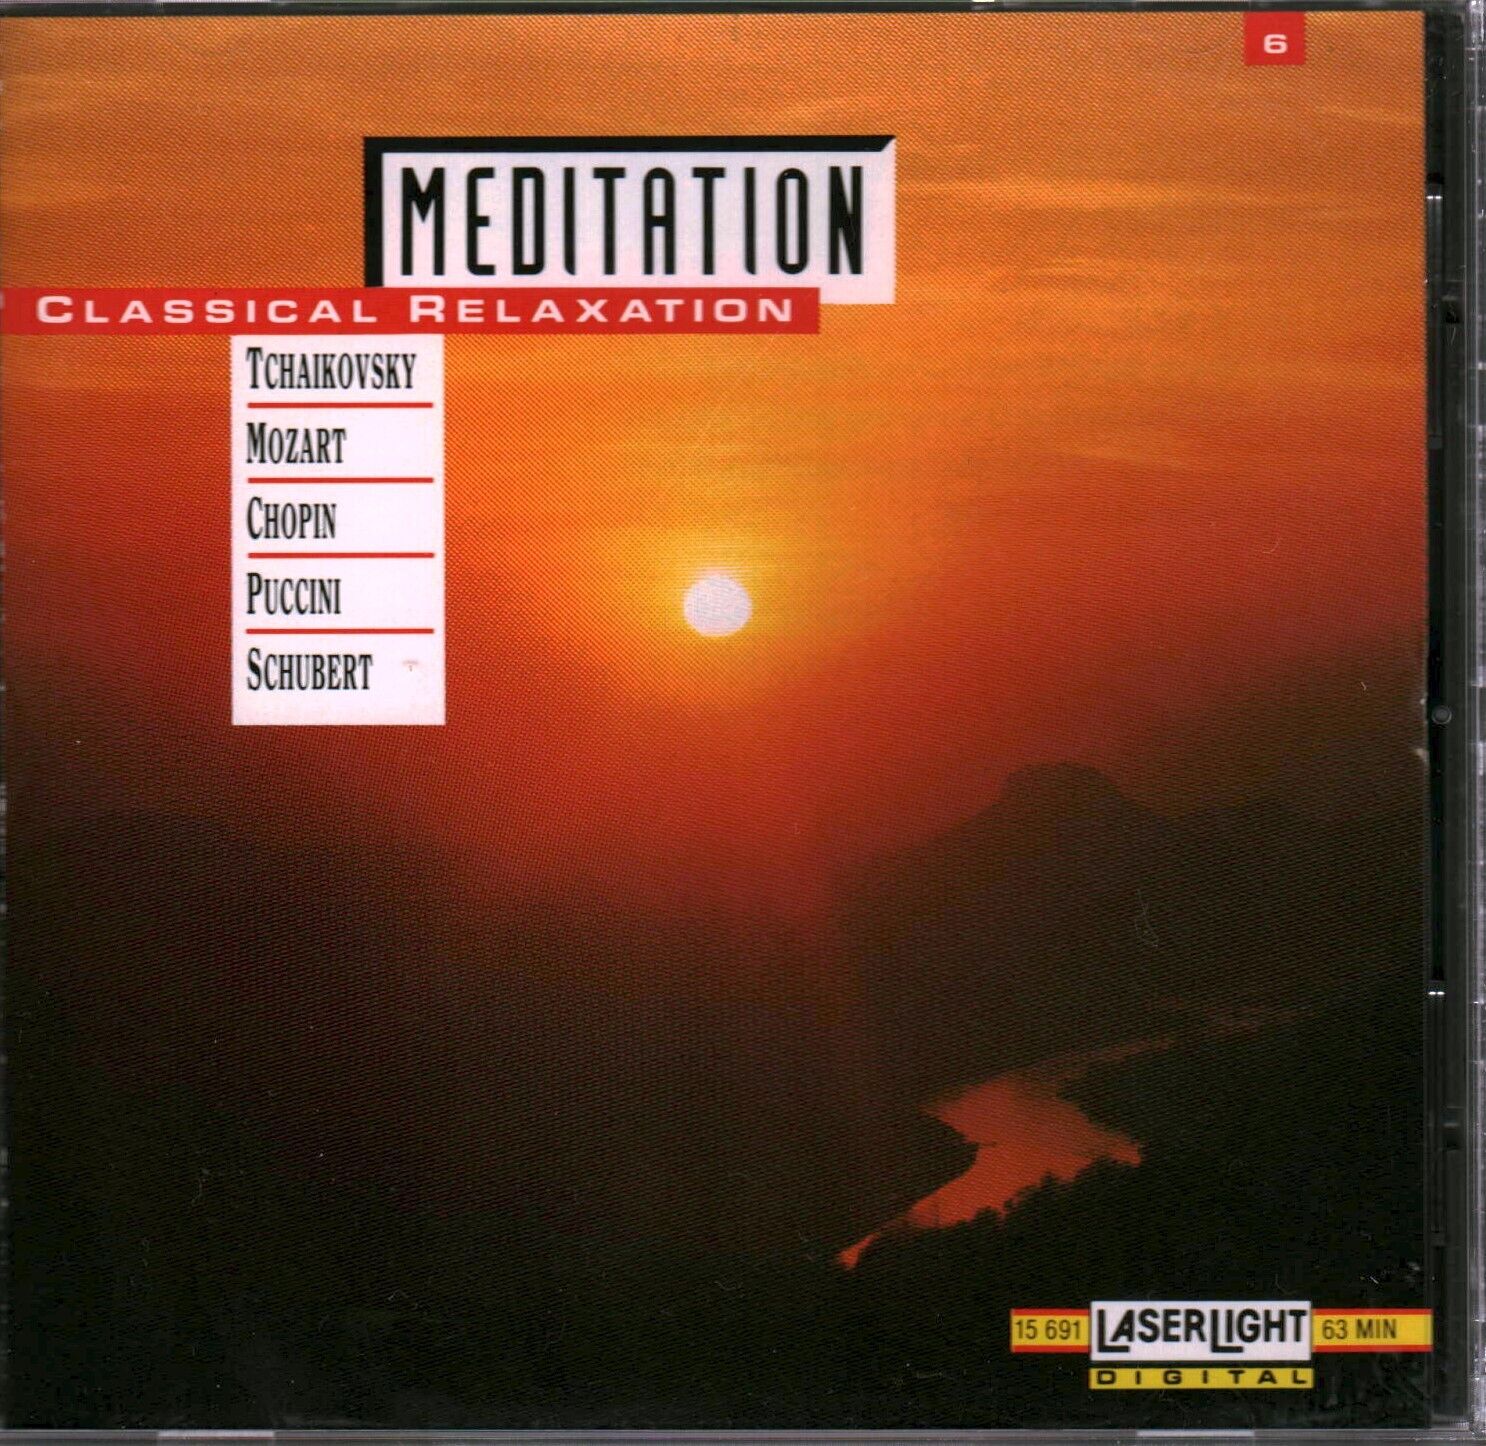 Meditation: Classical Relaxation, Vol. 6 (CD, May-1998, Delta Distribution)